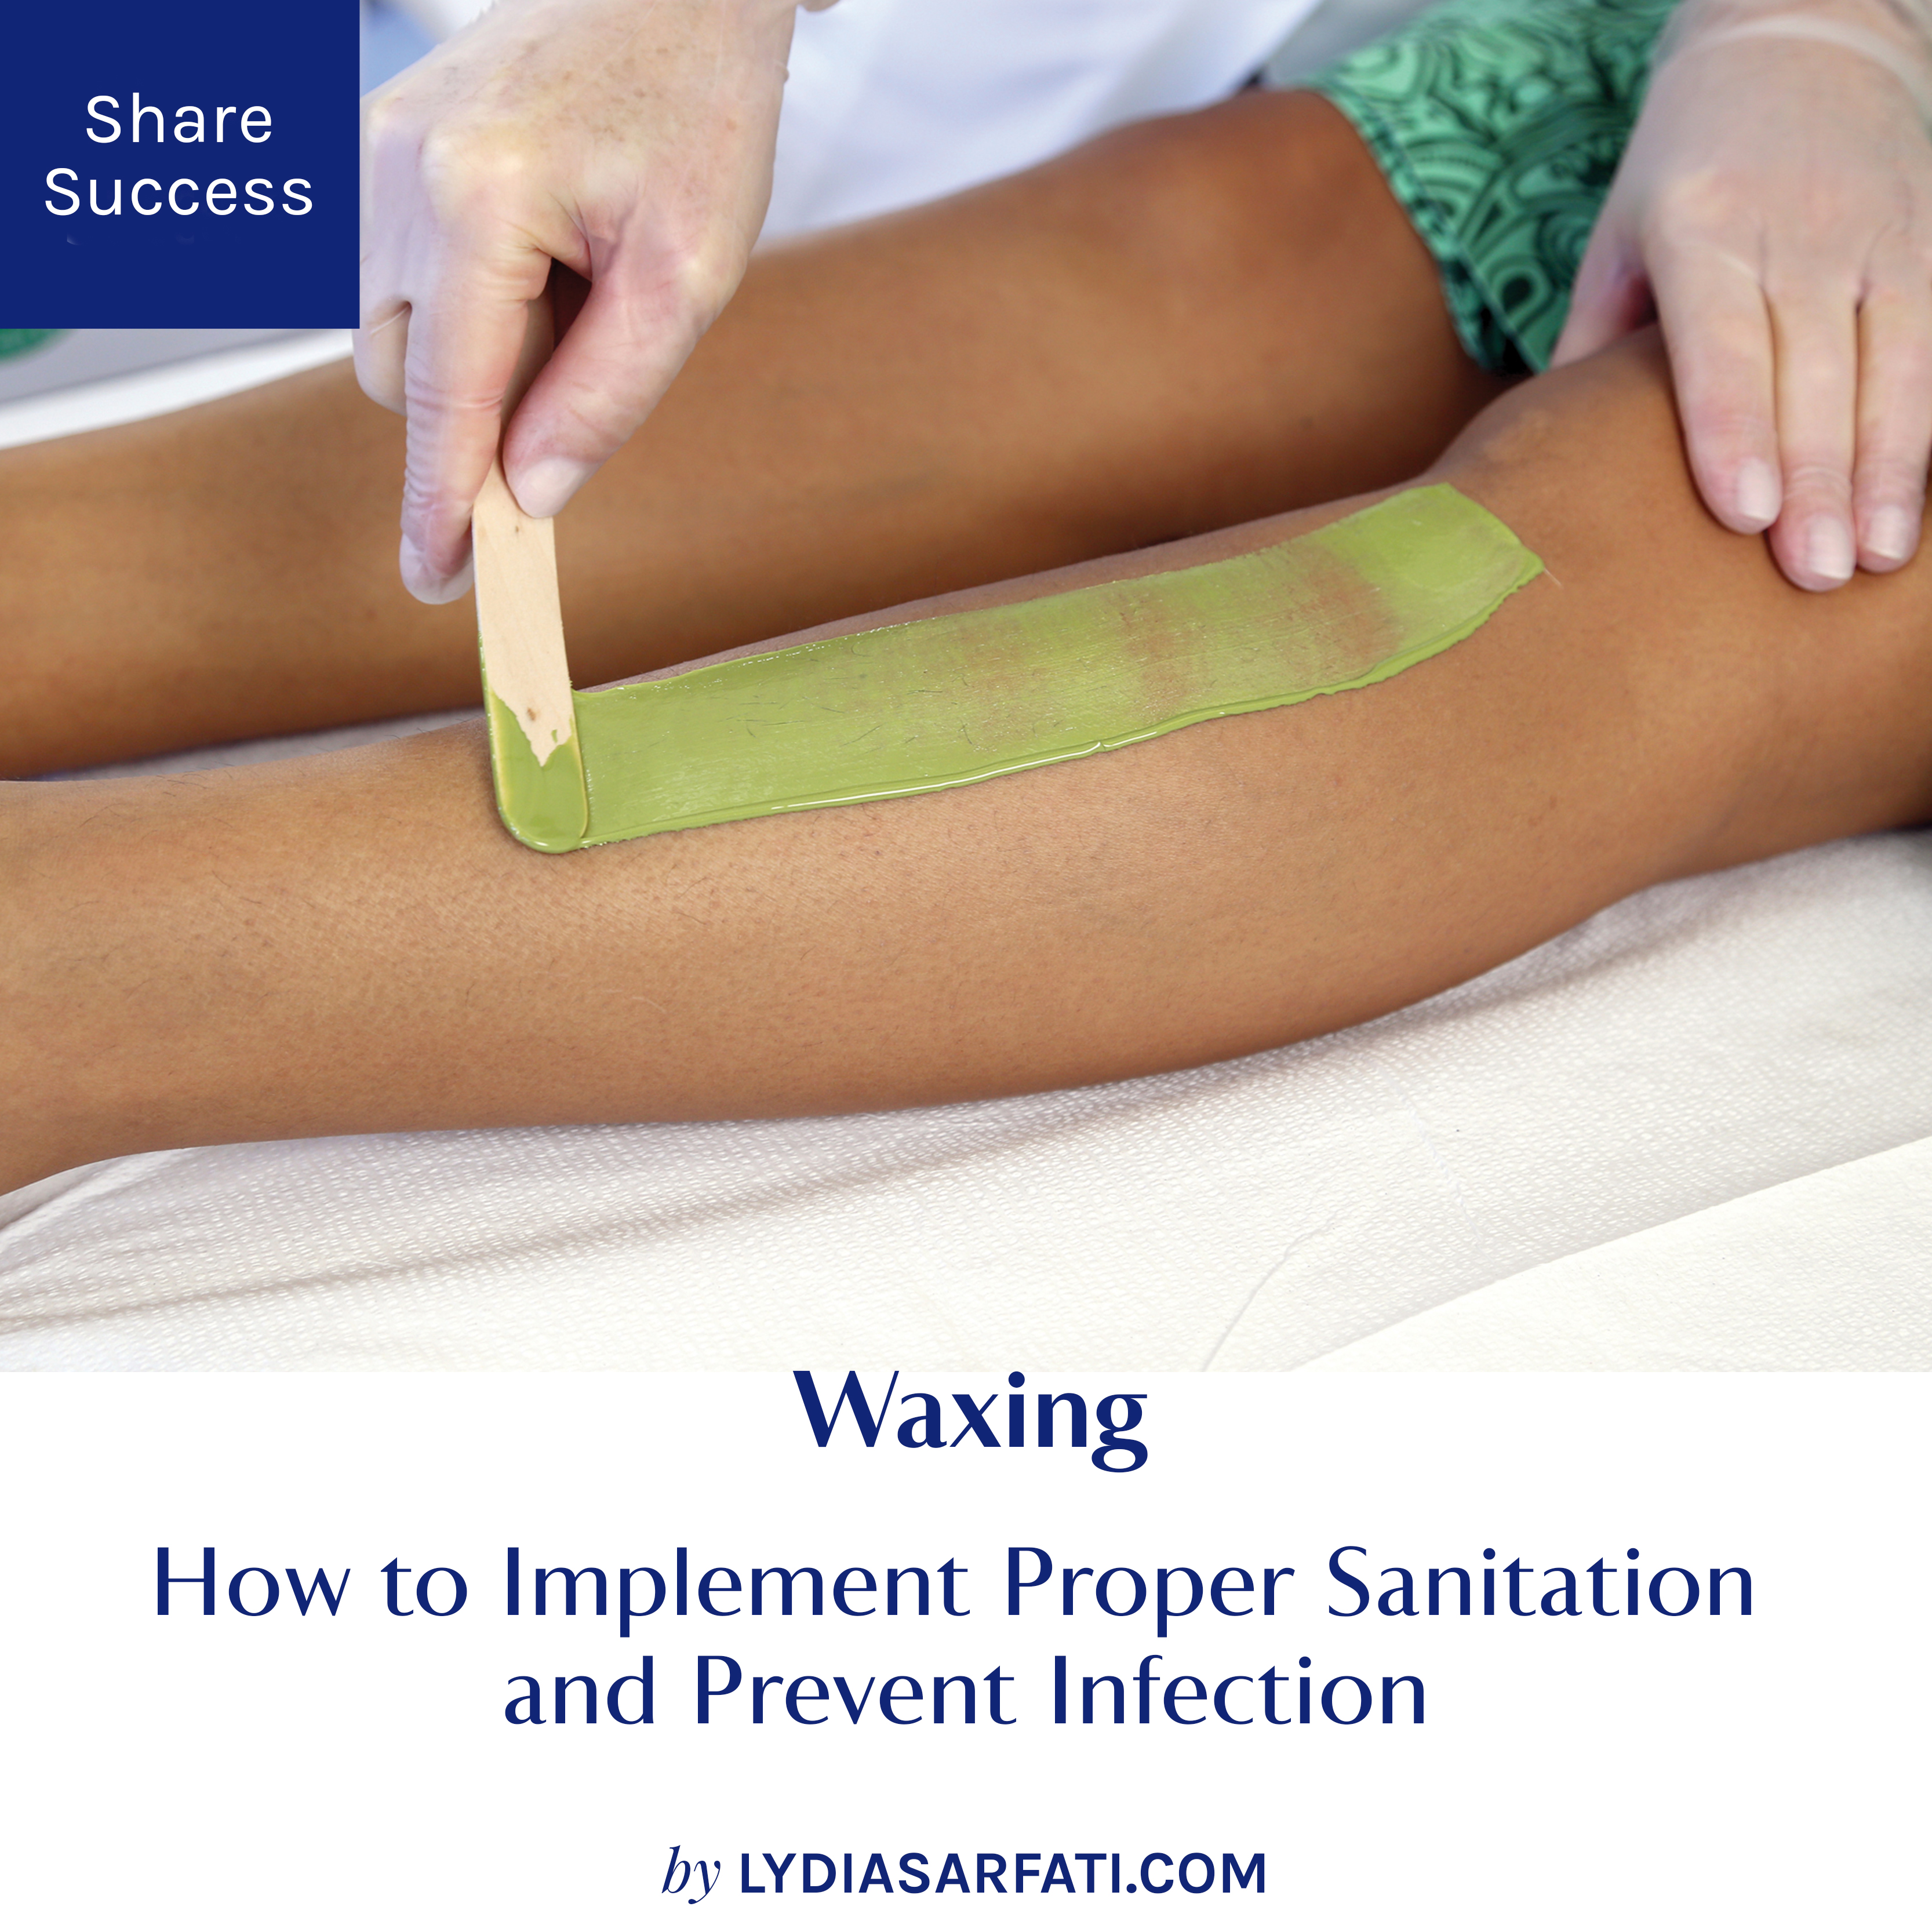 Waxing: How to Implement Proper Sanitation and Prevent Infection